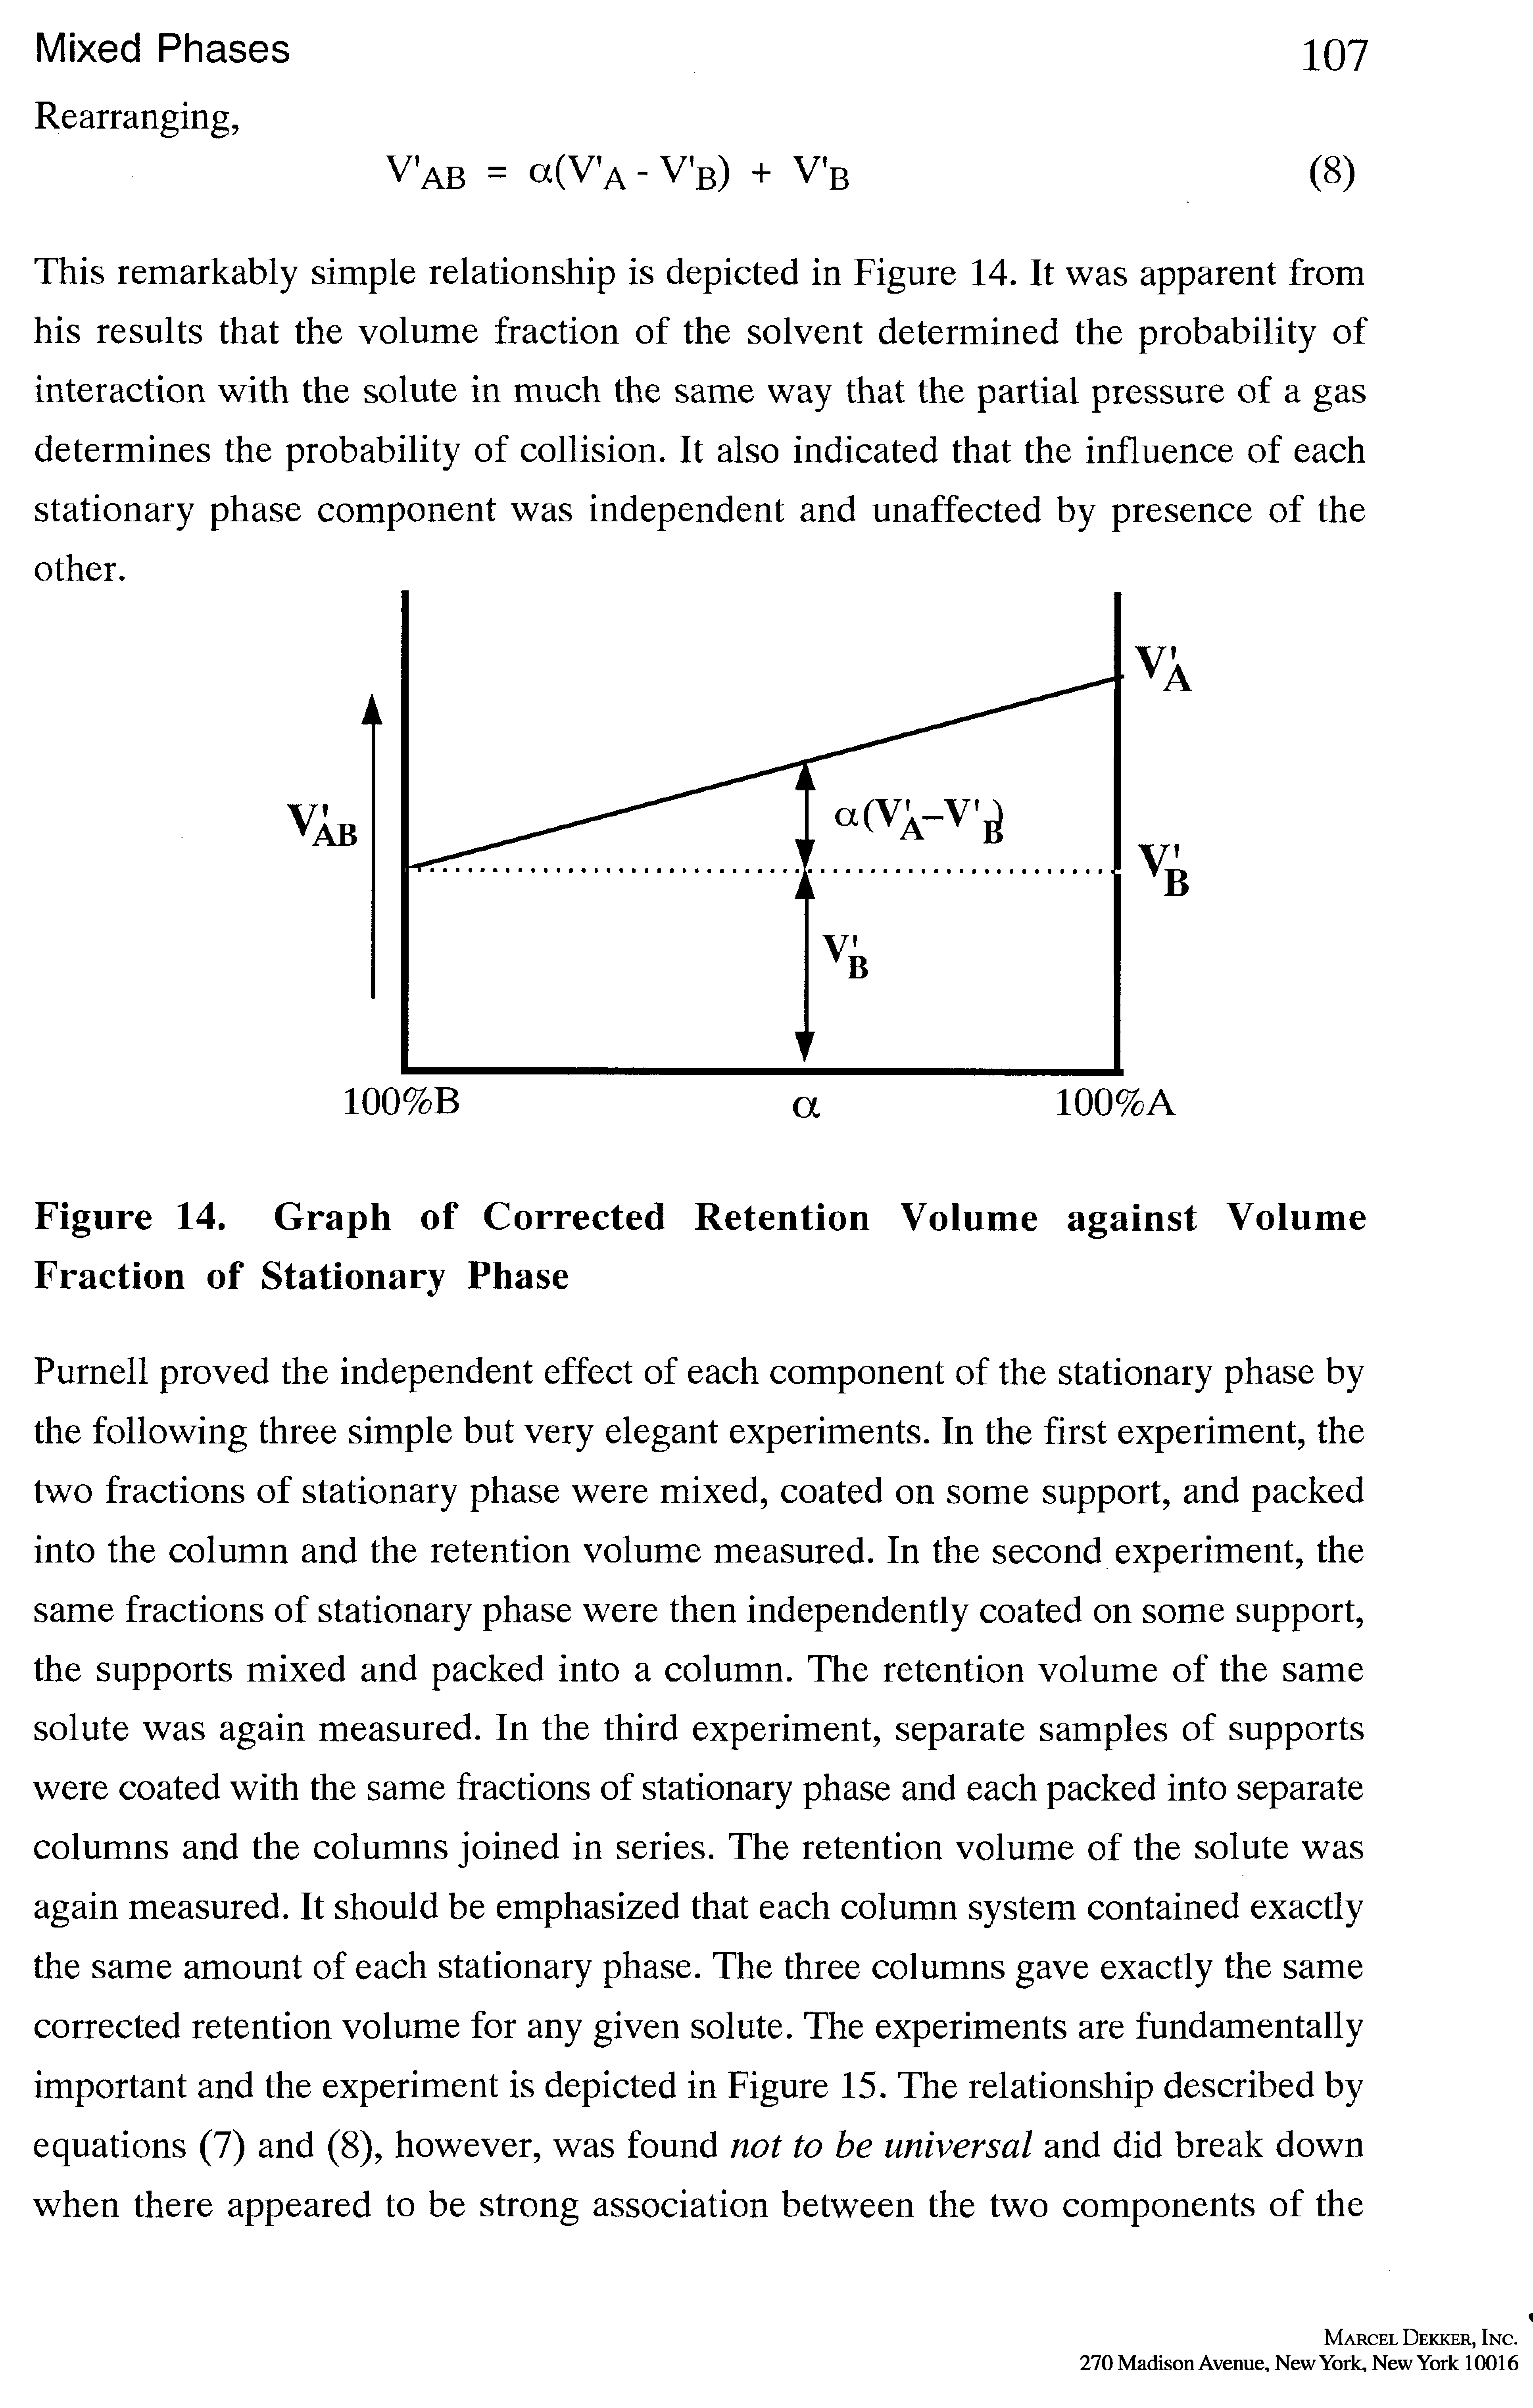 Figure 14. Graph of Corrected Retention Volume against Volume Fraction of Stationary Phase...